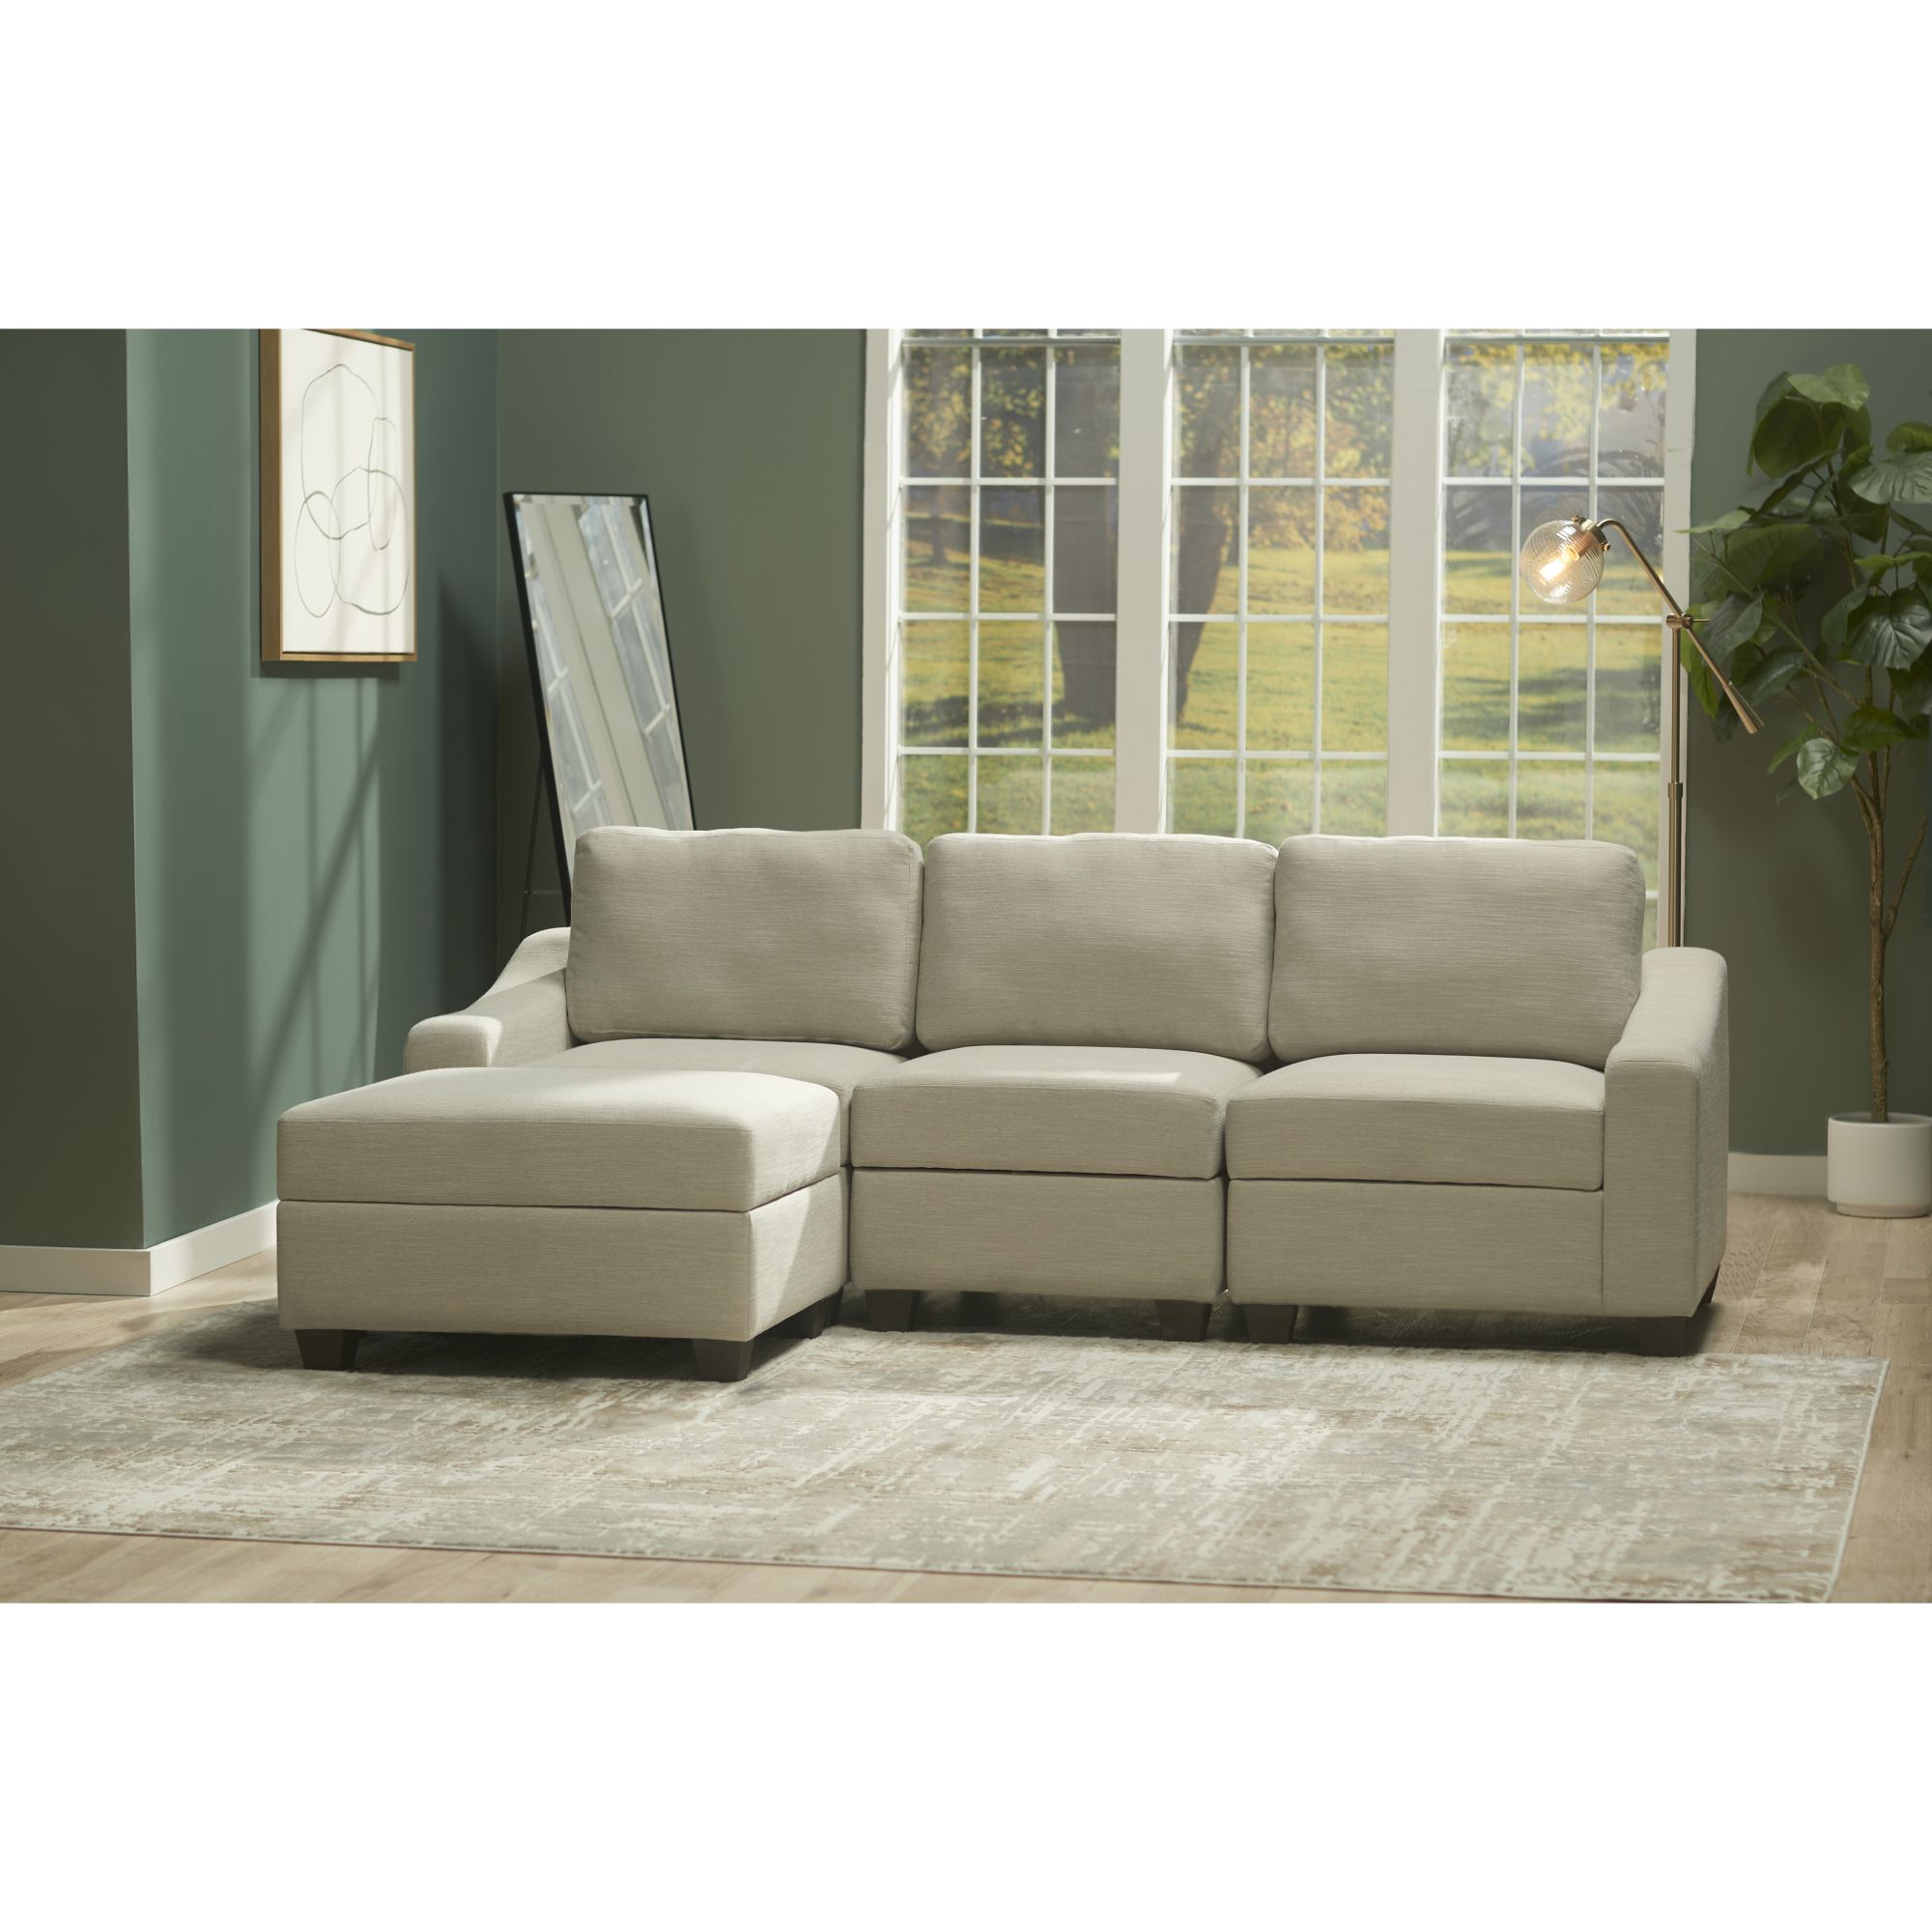 Home to Office Stratton Modular Sofa with Storage